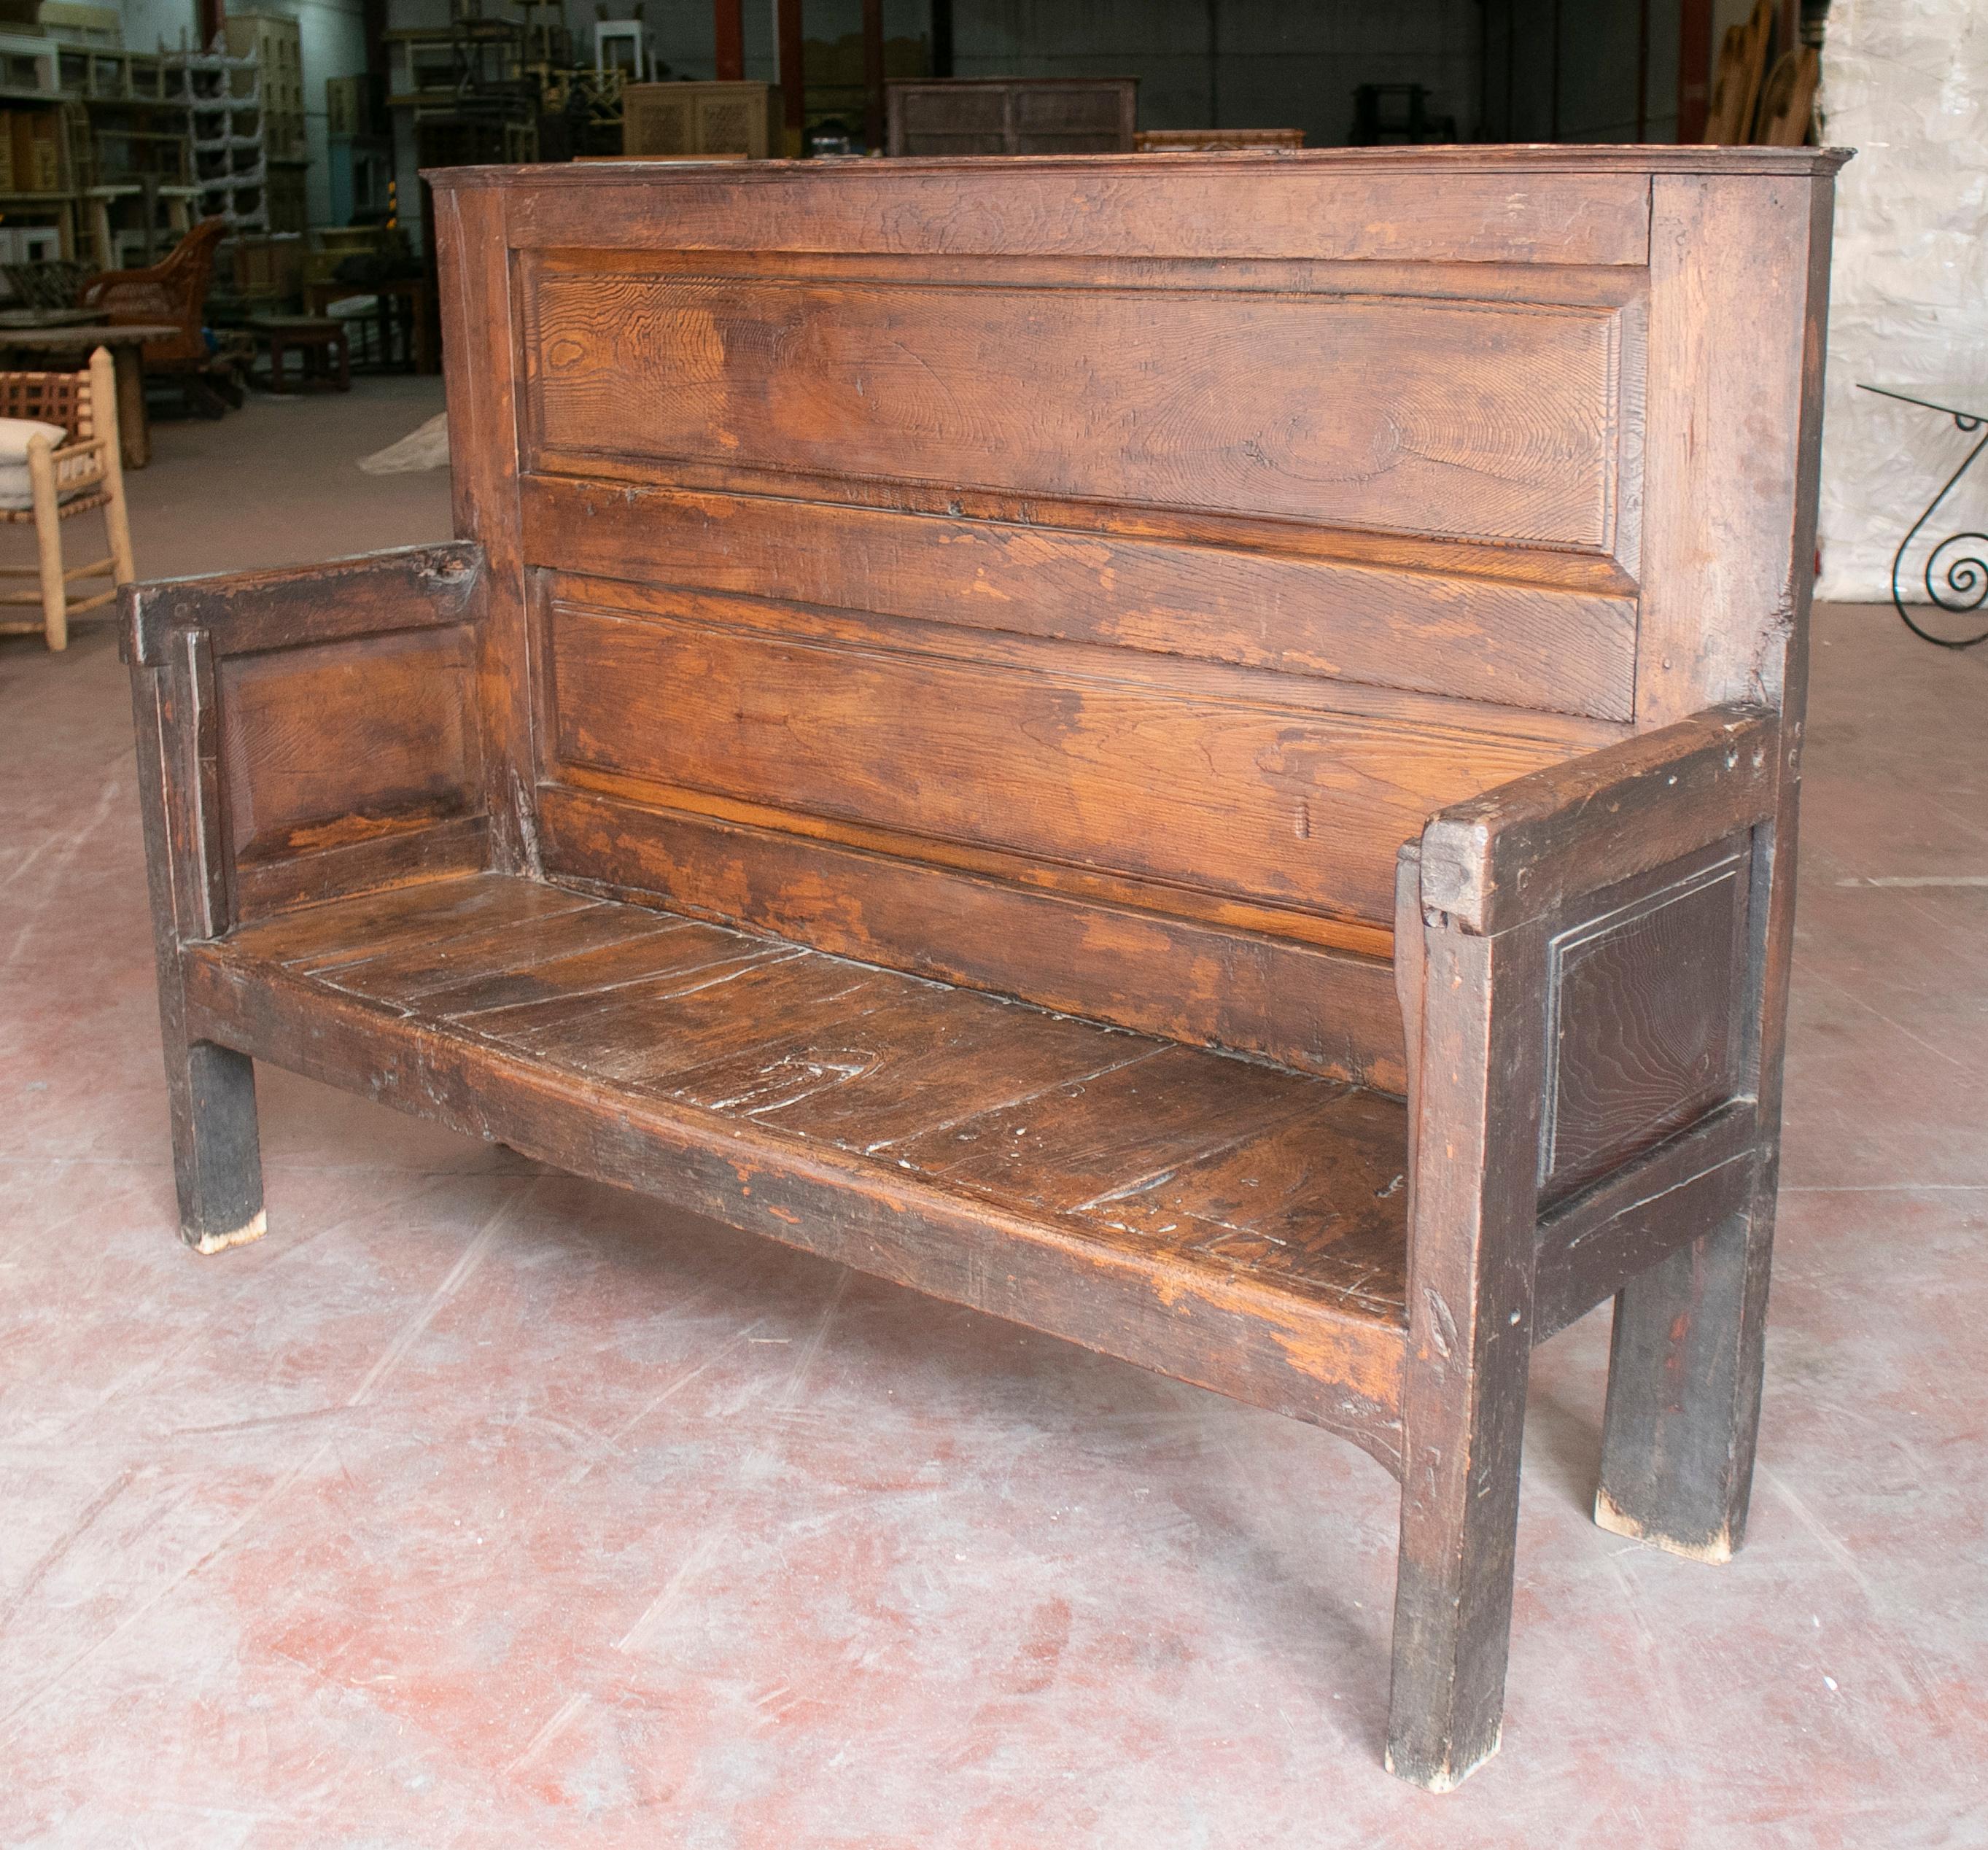 Antique 19th century northern Spain chestnut rustic seating bench.